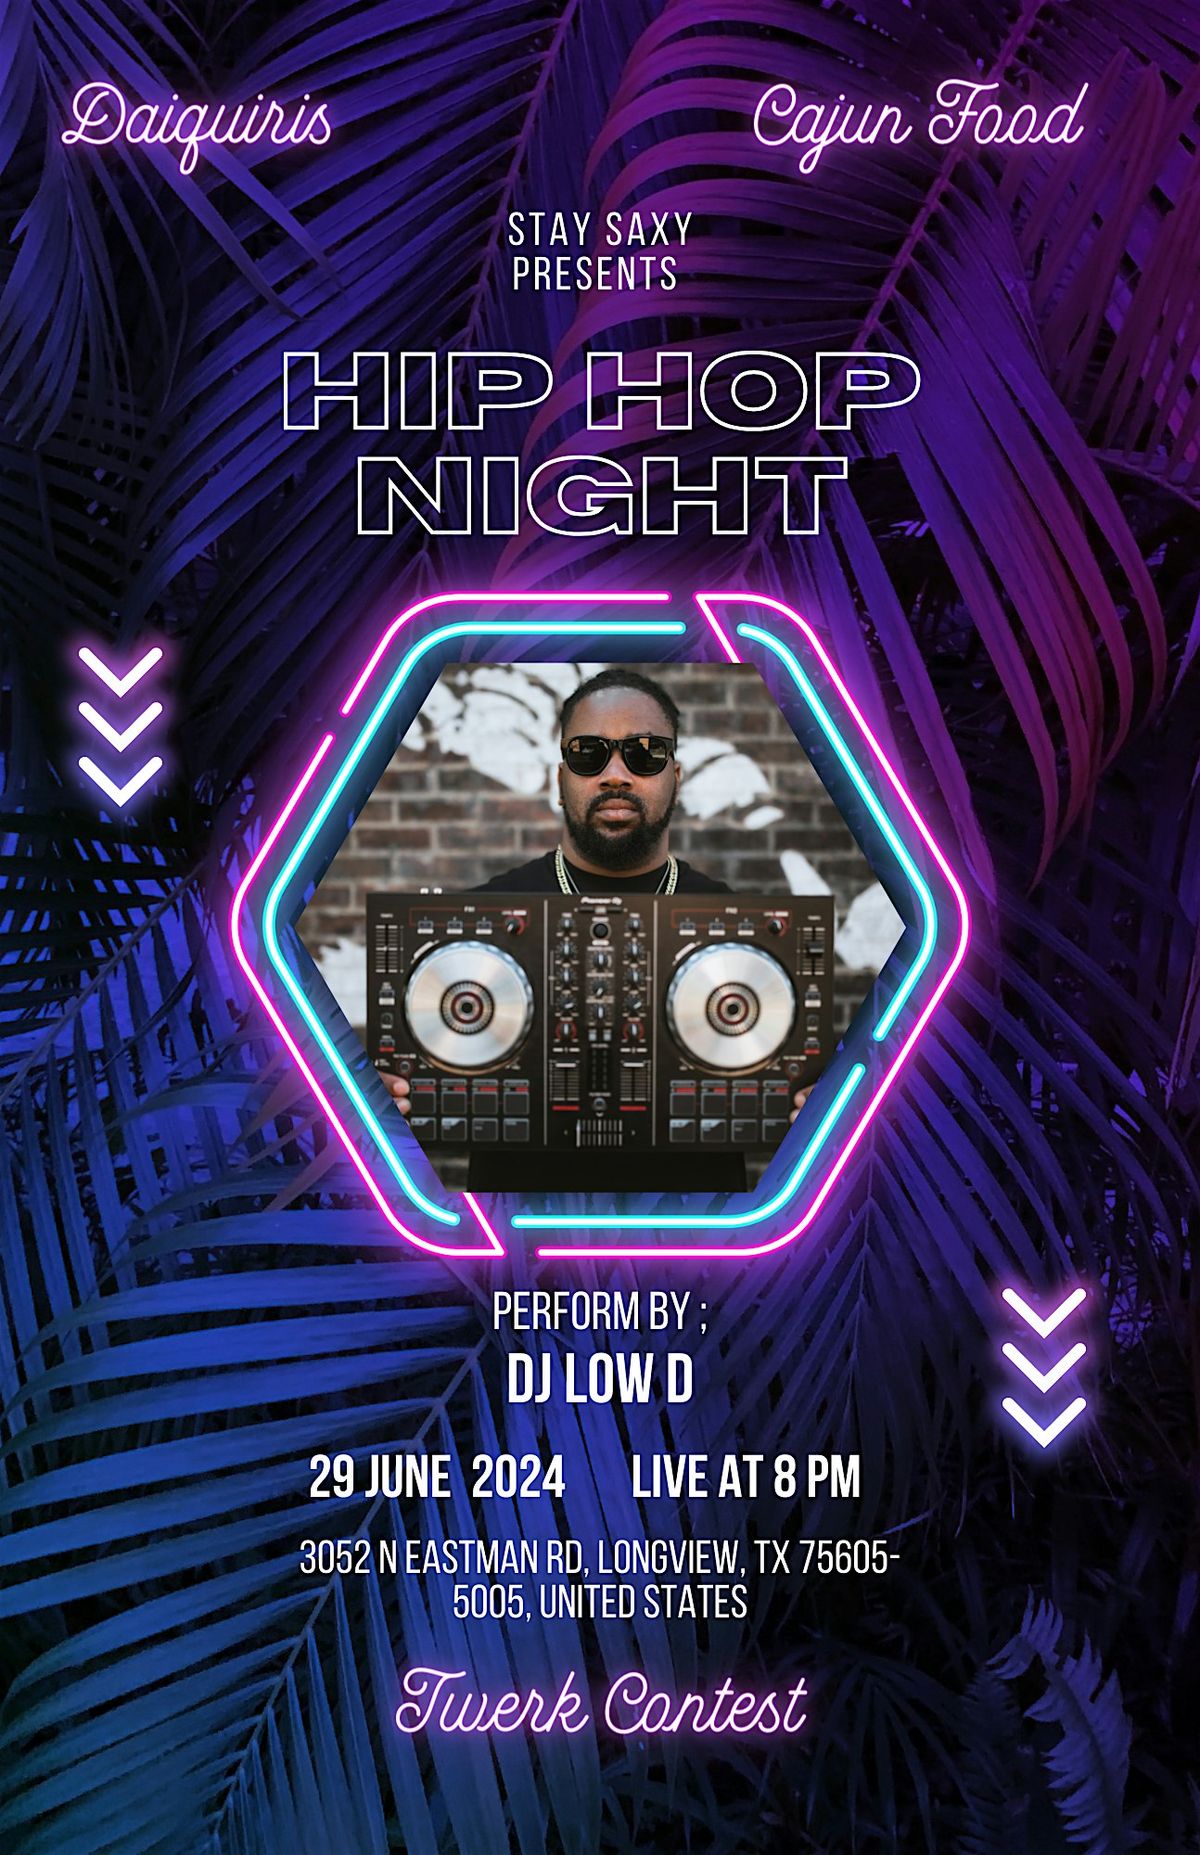 Hip Hop Night presented by Stay Saxy